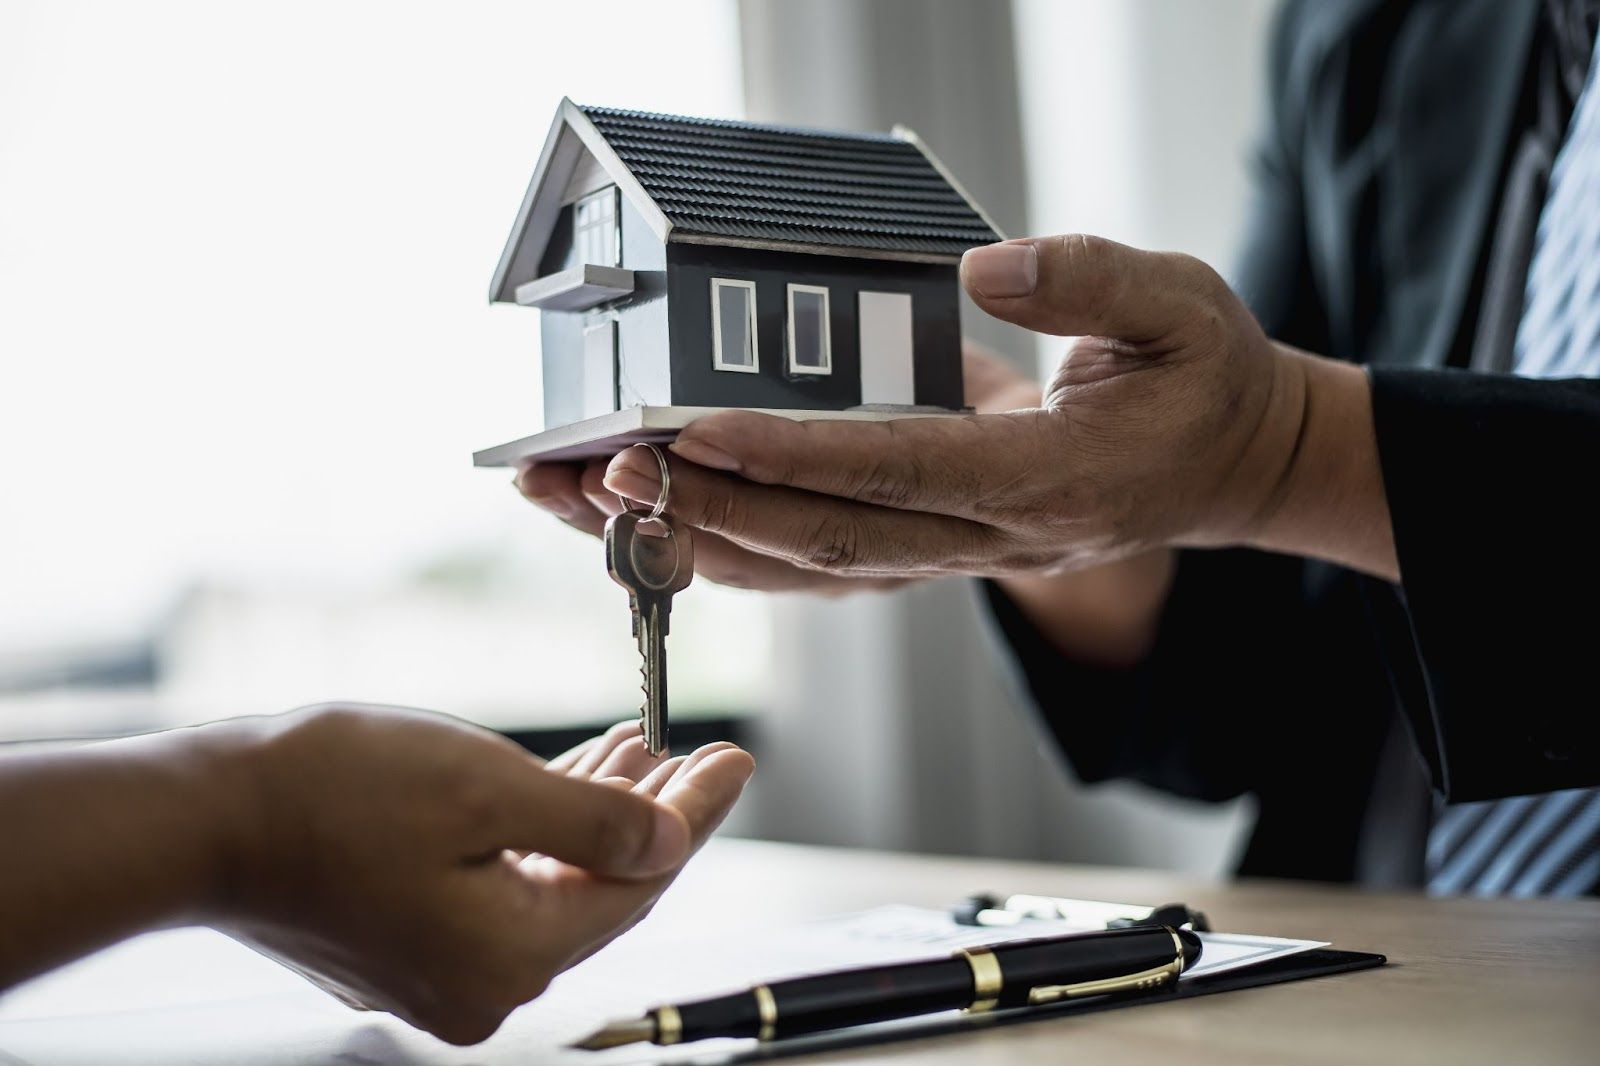 Hands holding a model gray house lower a house key into another person's open palm